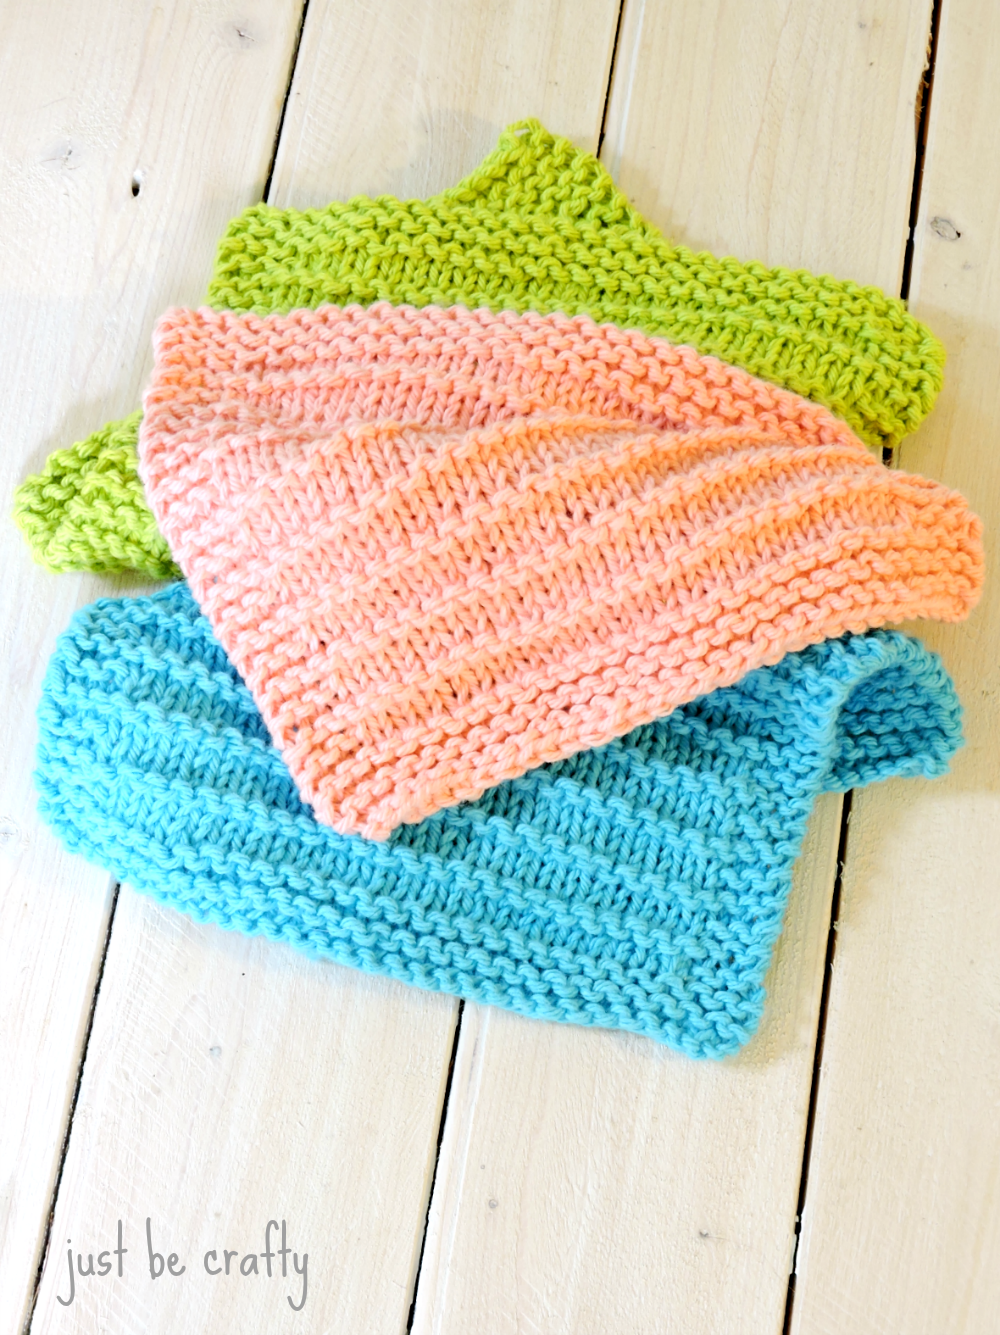 Farmhouse Kitchen Knitted Dishcloths - Just Be Crafty